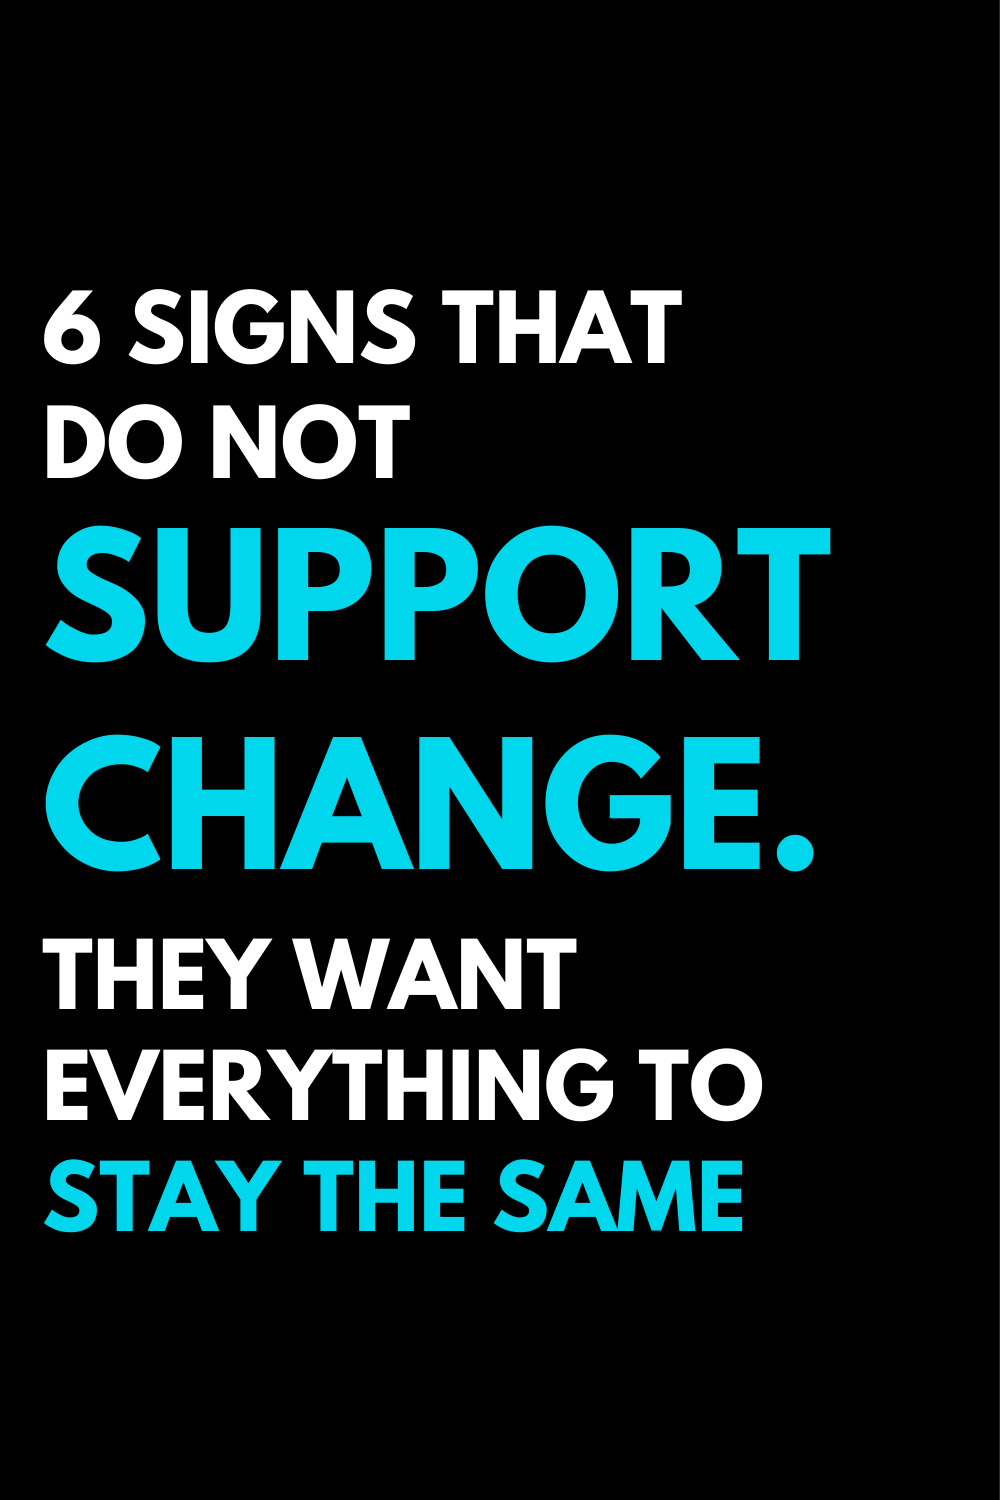 6 signs that do not support change. They want everything to stay the same